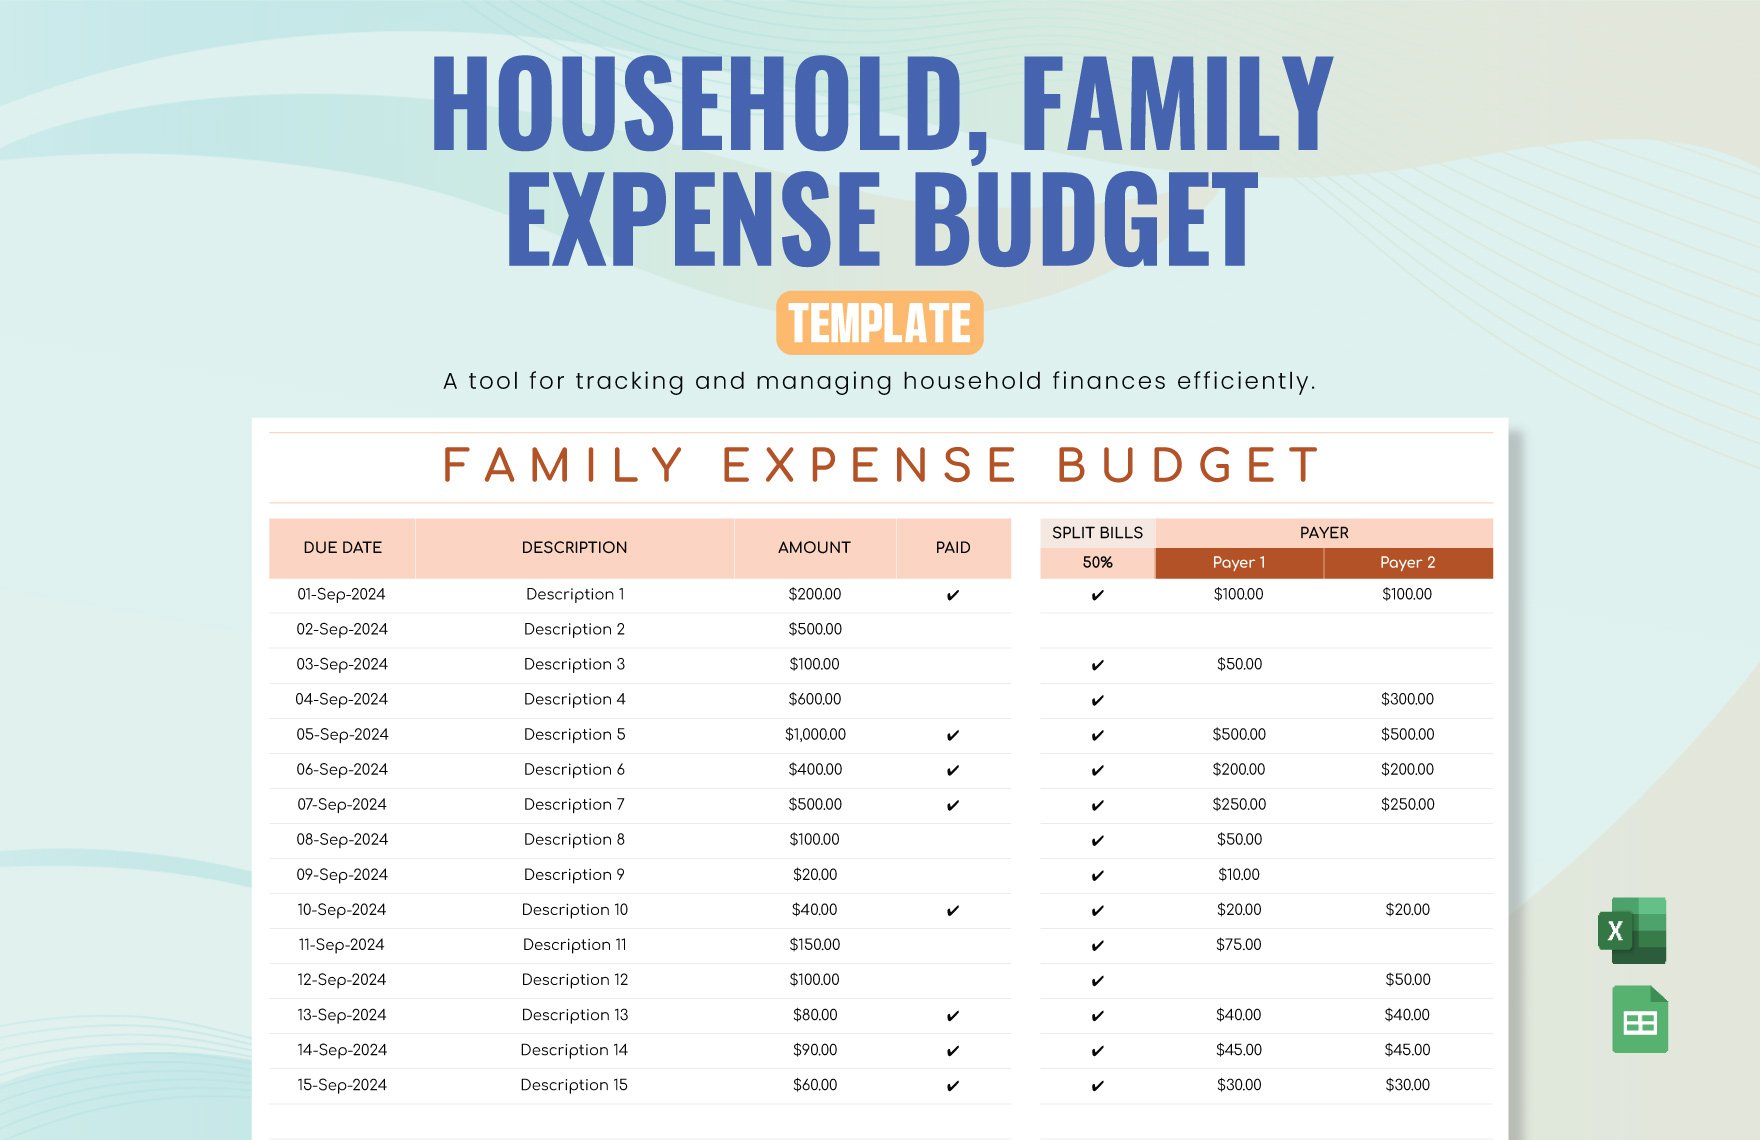 Free House Hold, Family Expense Budget Template in Excel, Google Sheets